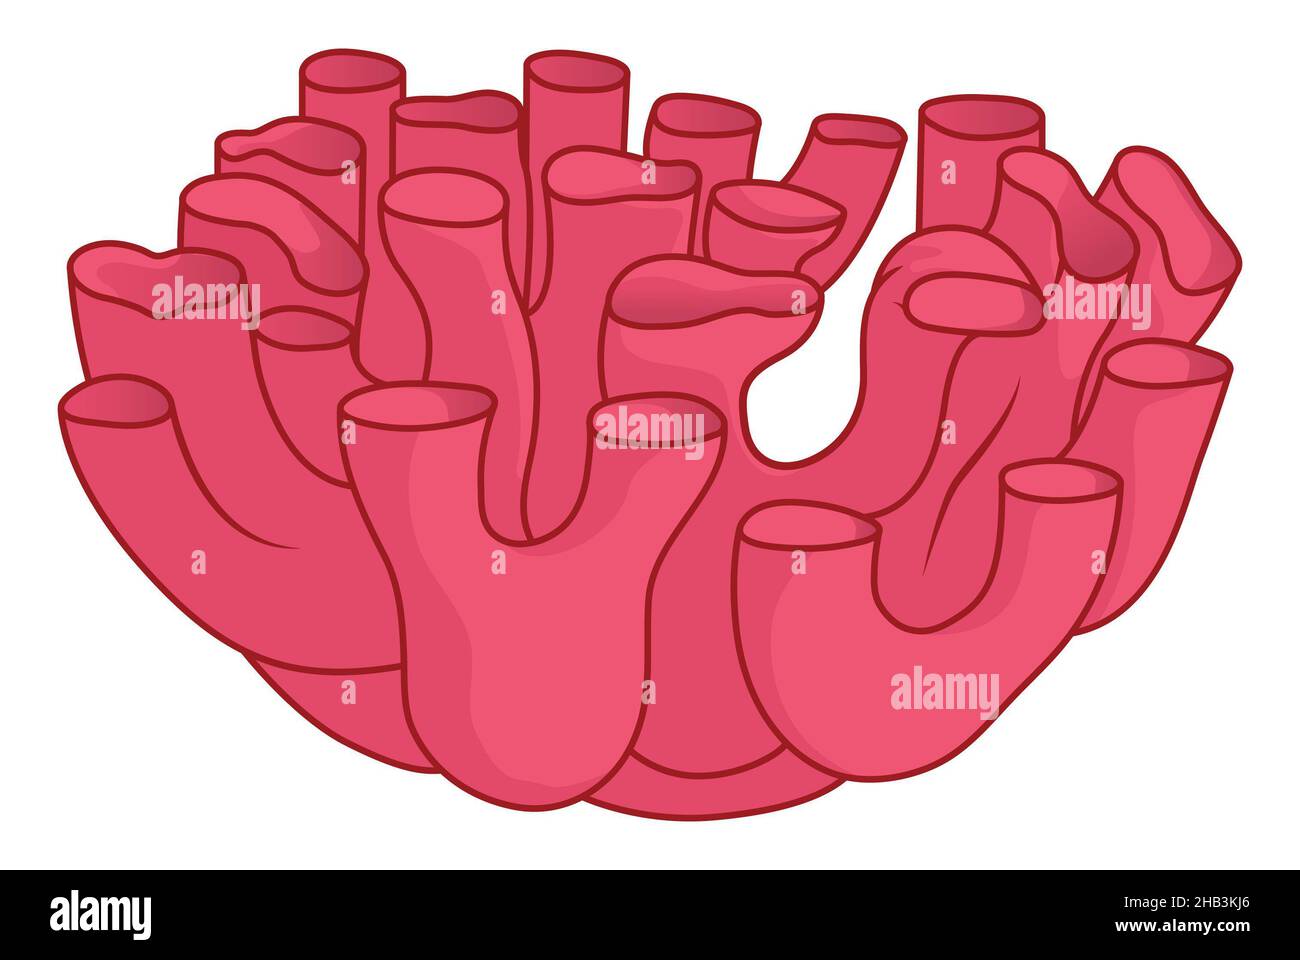 Smooth endoplasmic reticulum simple medical illustration note on tubular structures Stock Photo